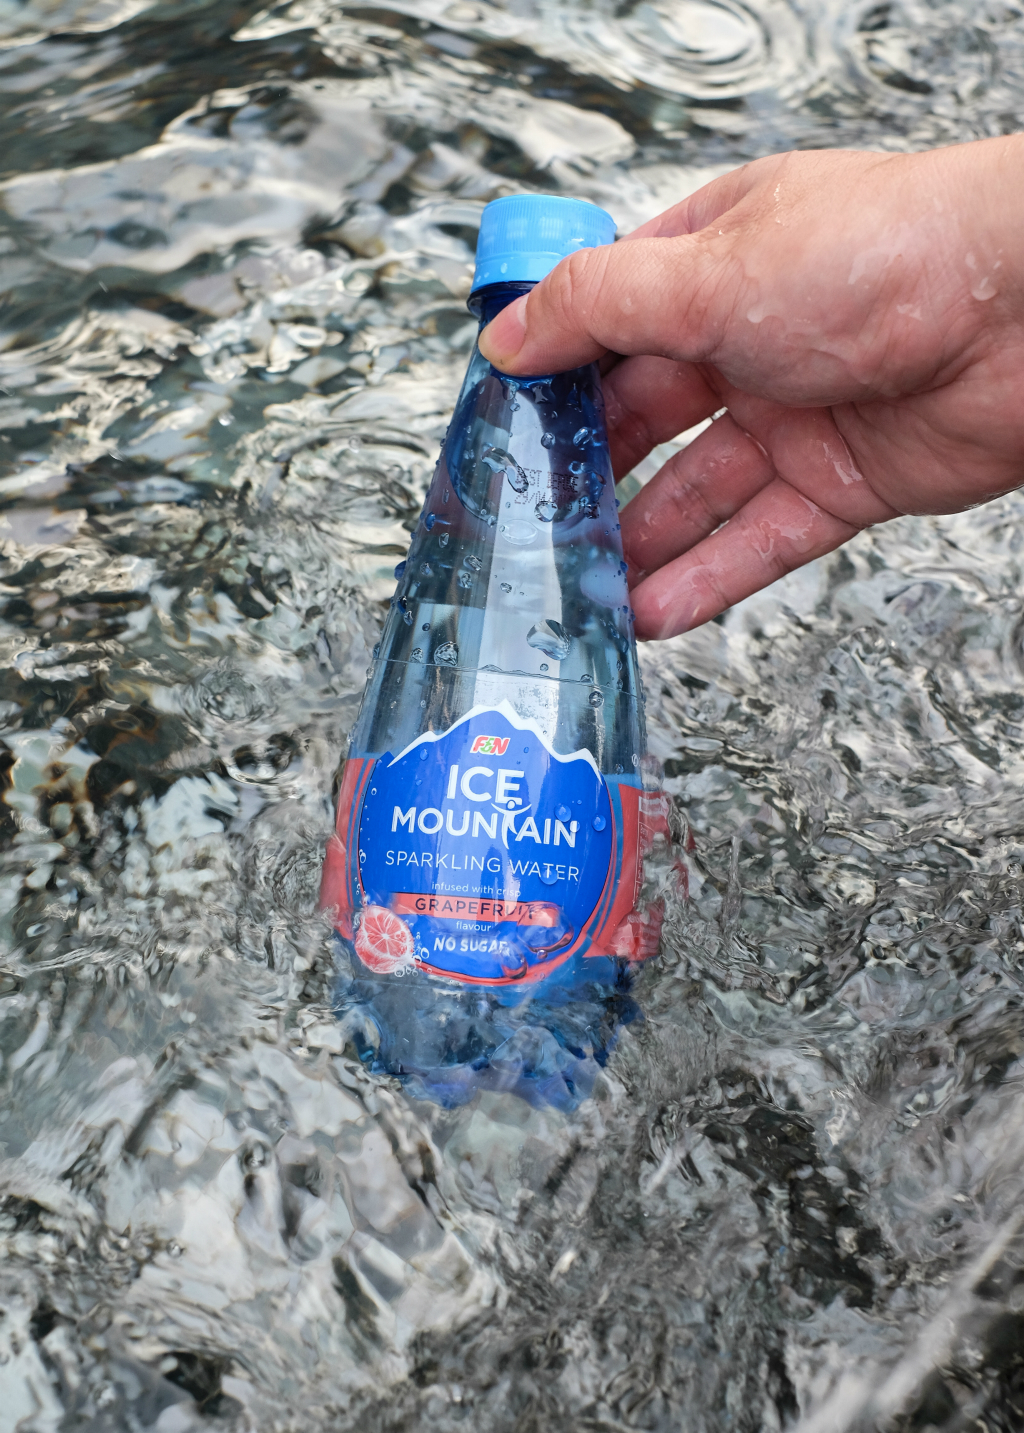 Ice Mountain Sparkling Water